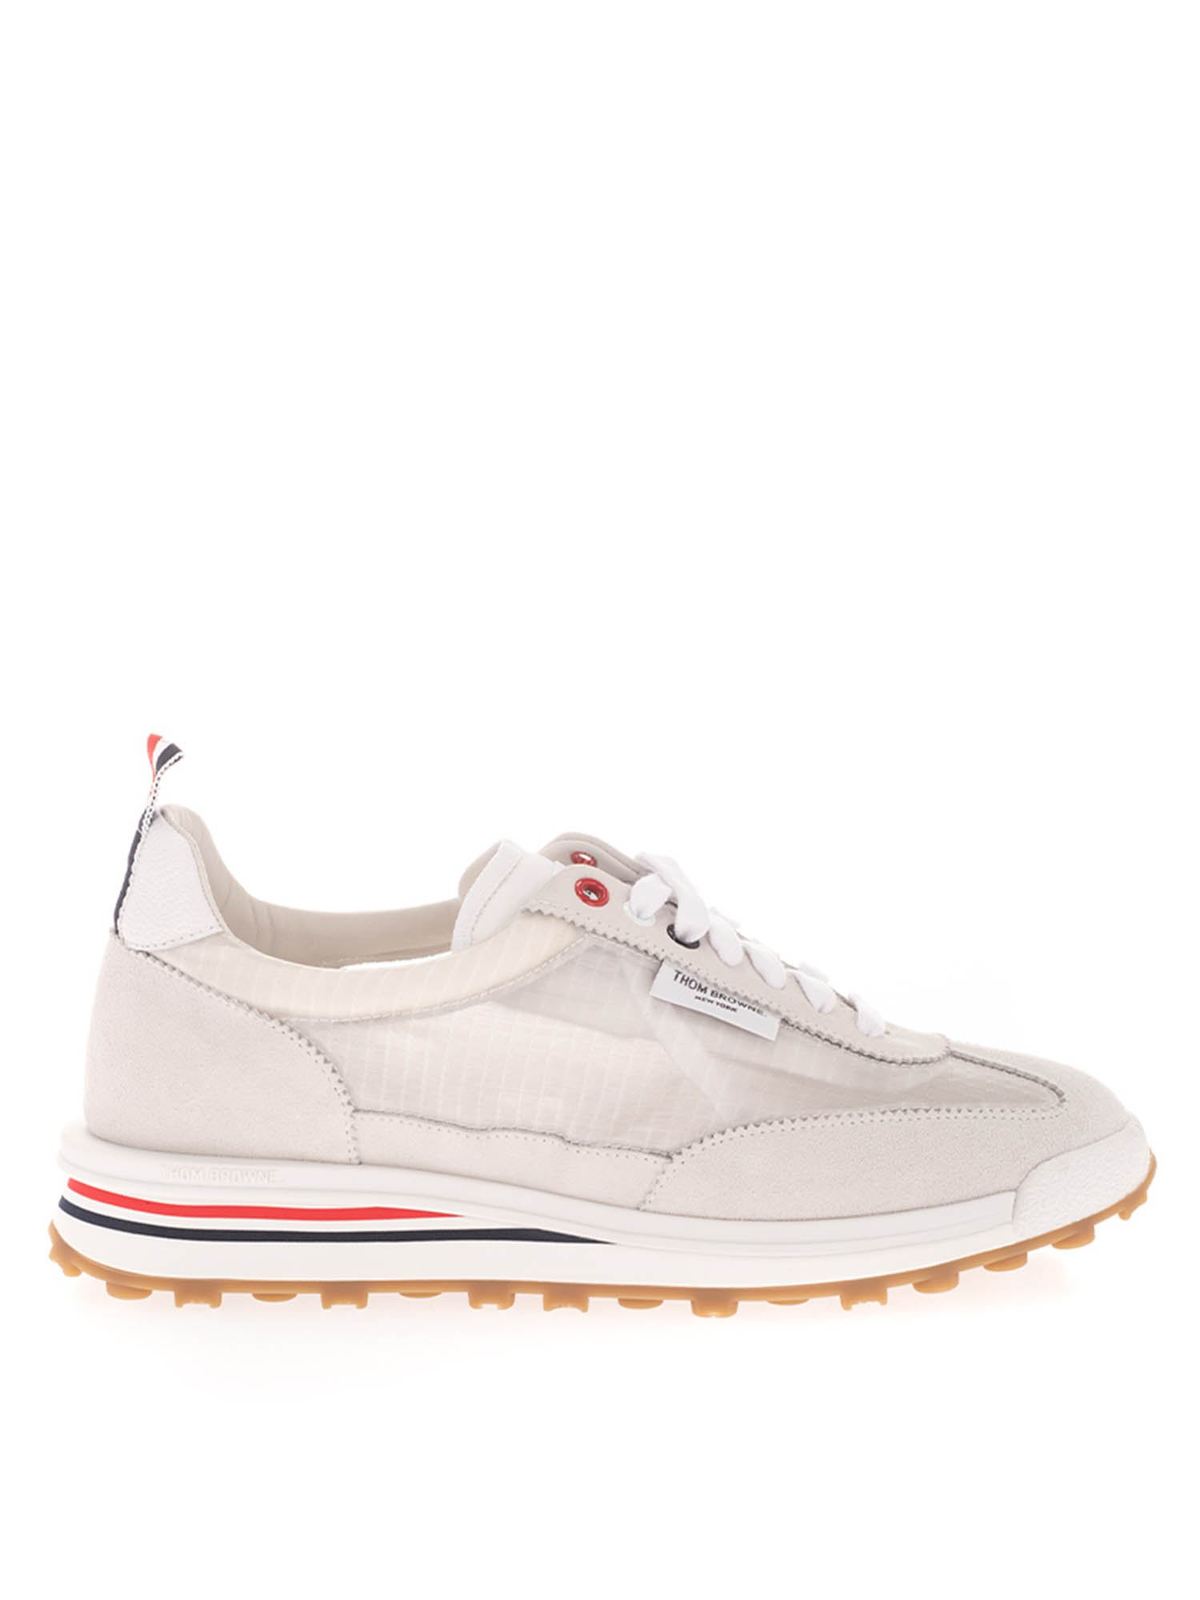 Thom Browne Suedes FABRIC AND SUEDE SNEAKERS IN WHITE